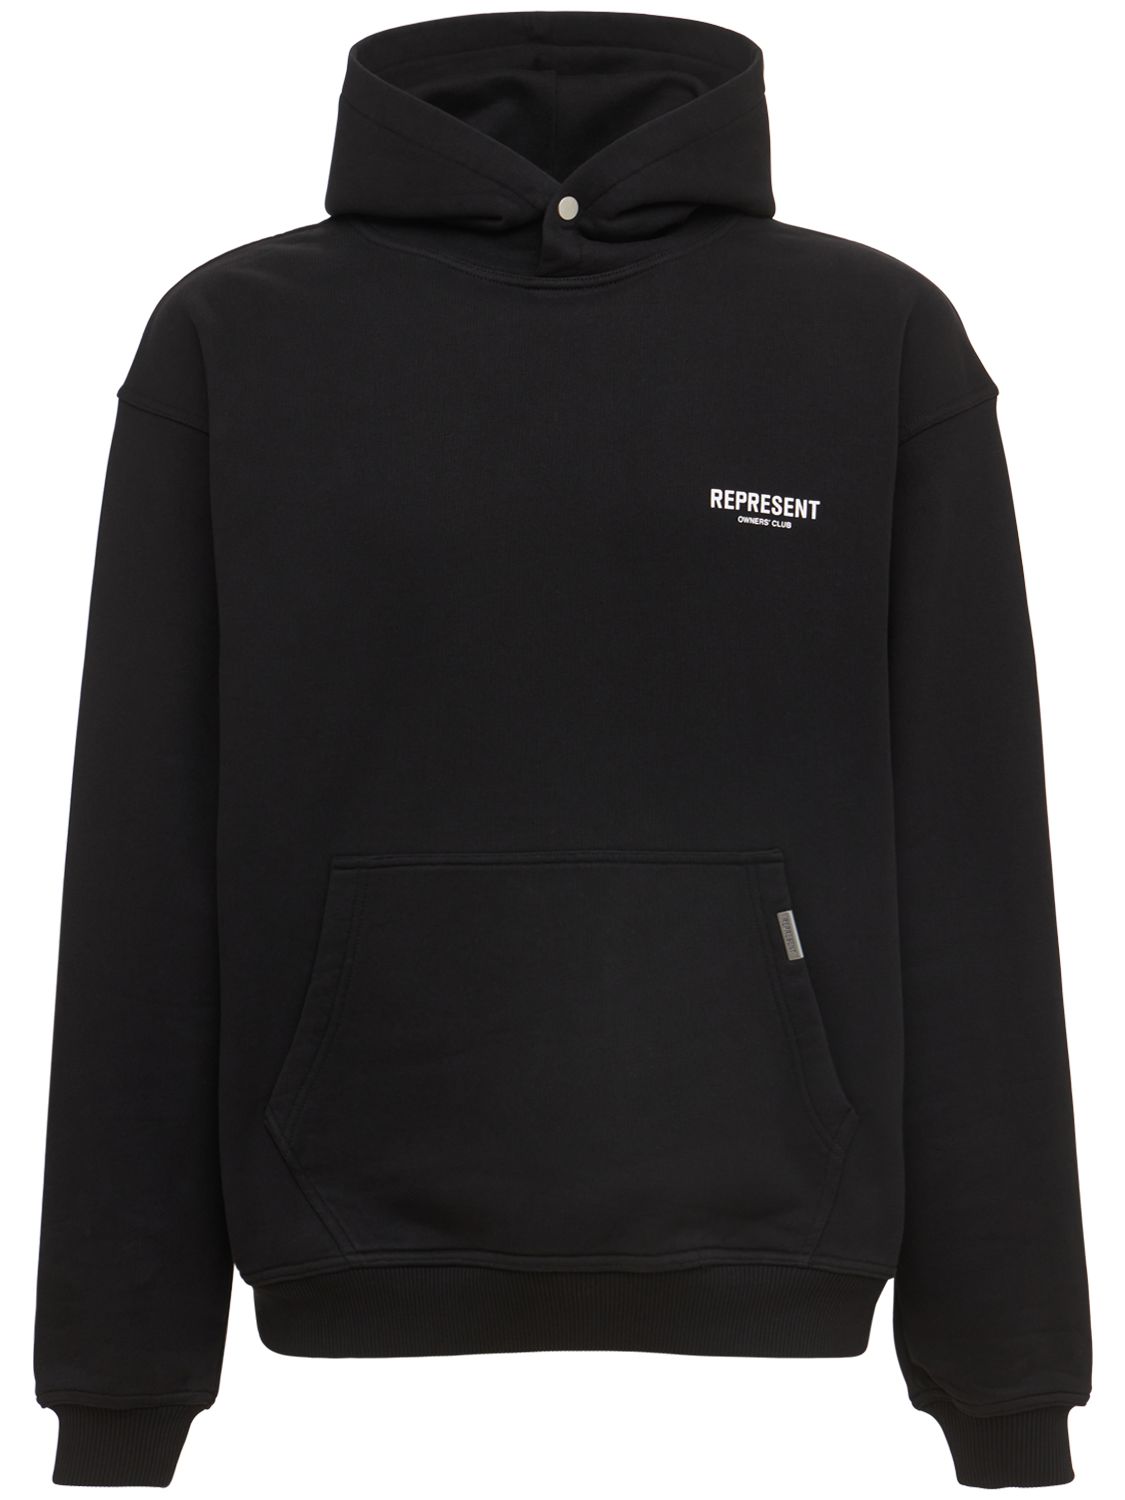 Shop Represent Owners Club Logo Cotton Hoodie In Black